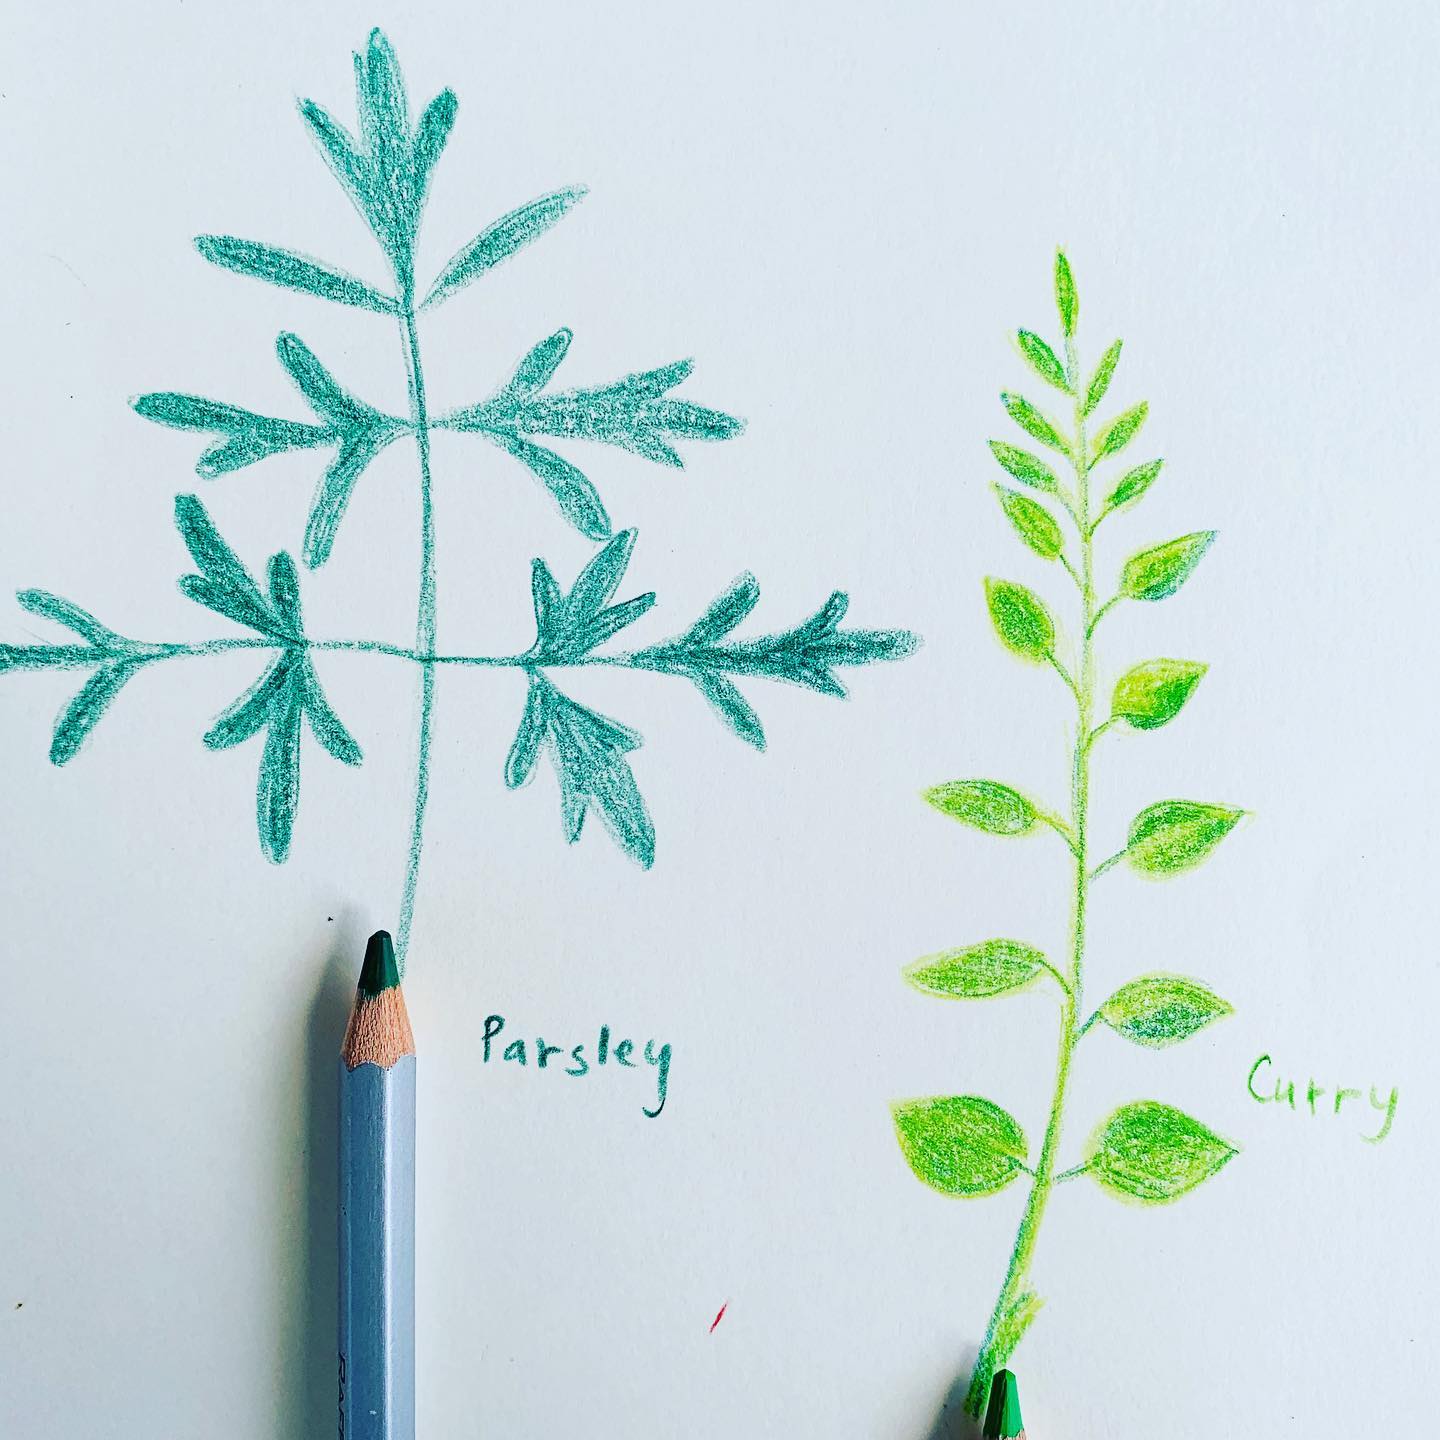 When you have no intention to cook, you sketch your herbs! Lunch will take care of itself!